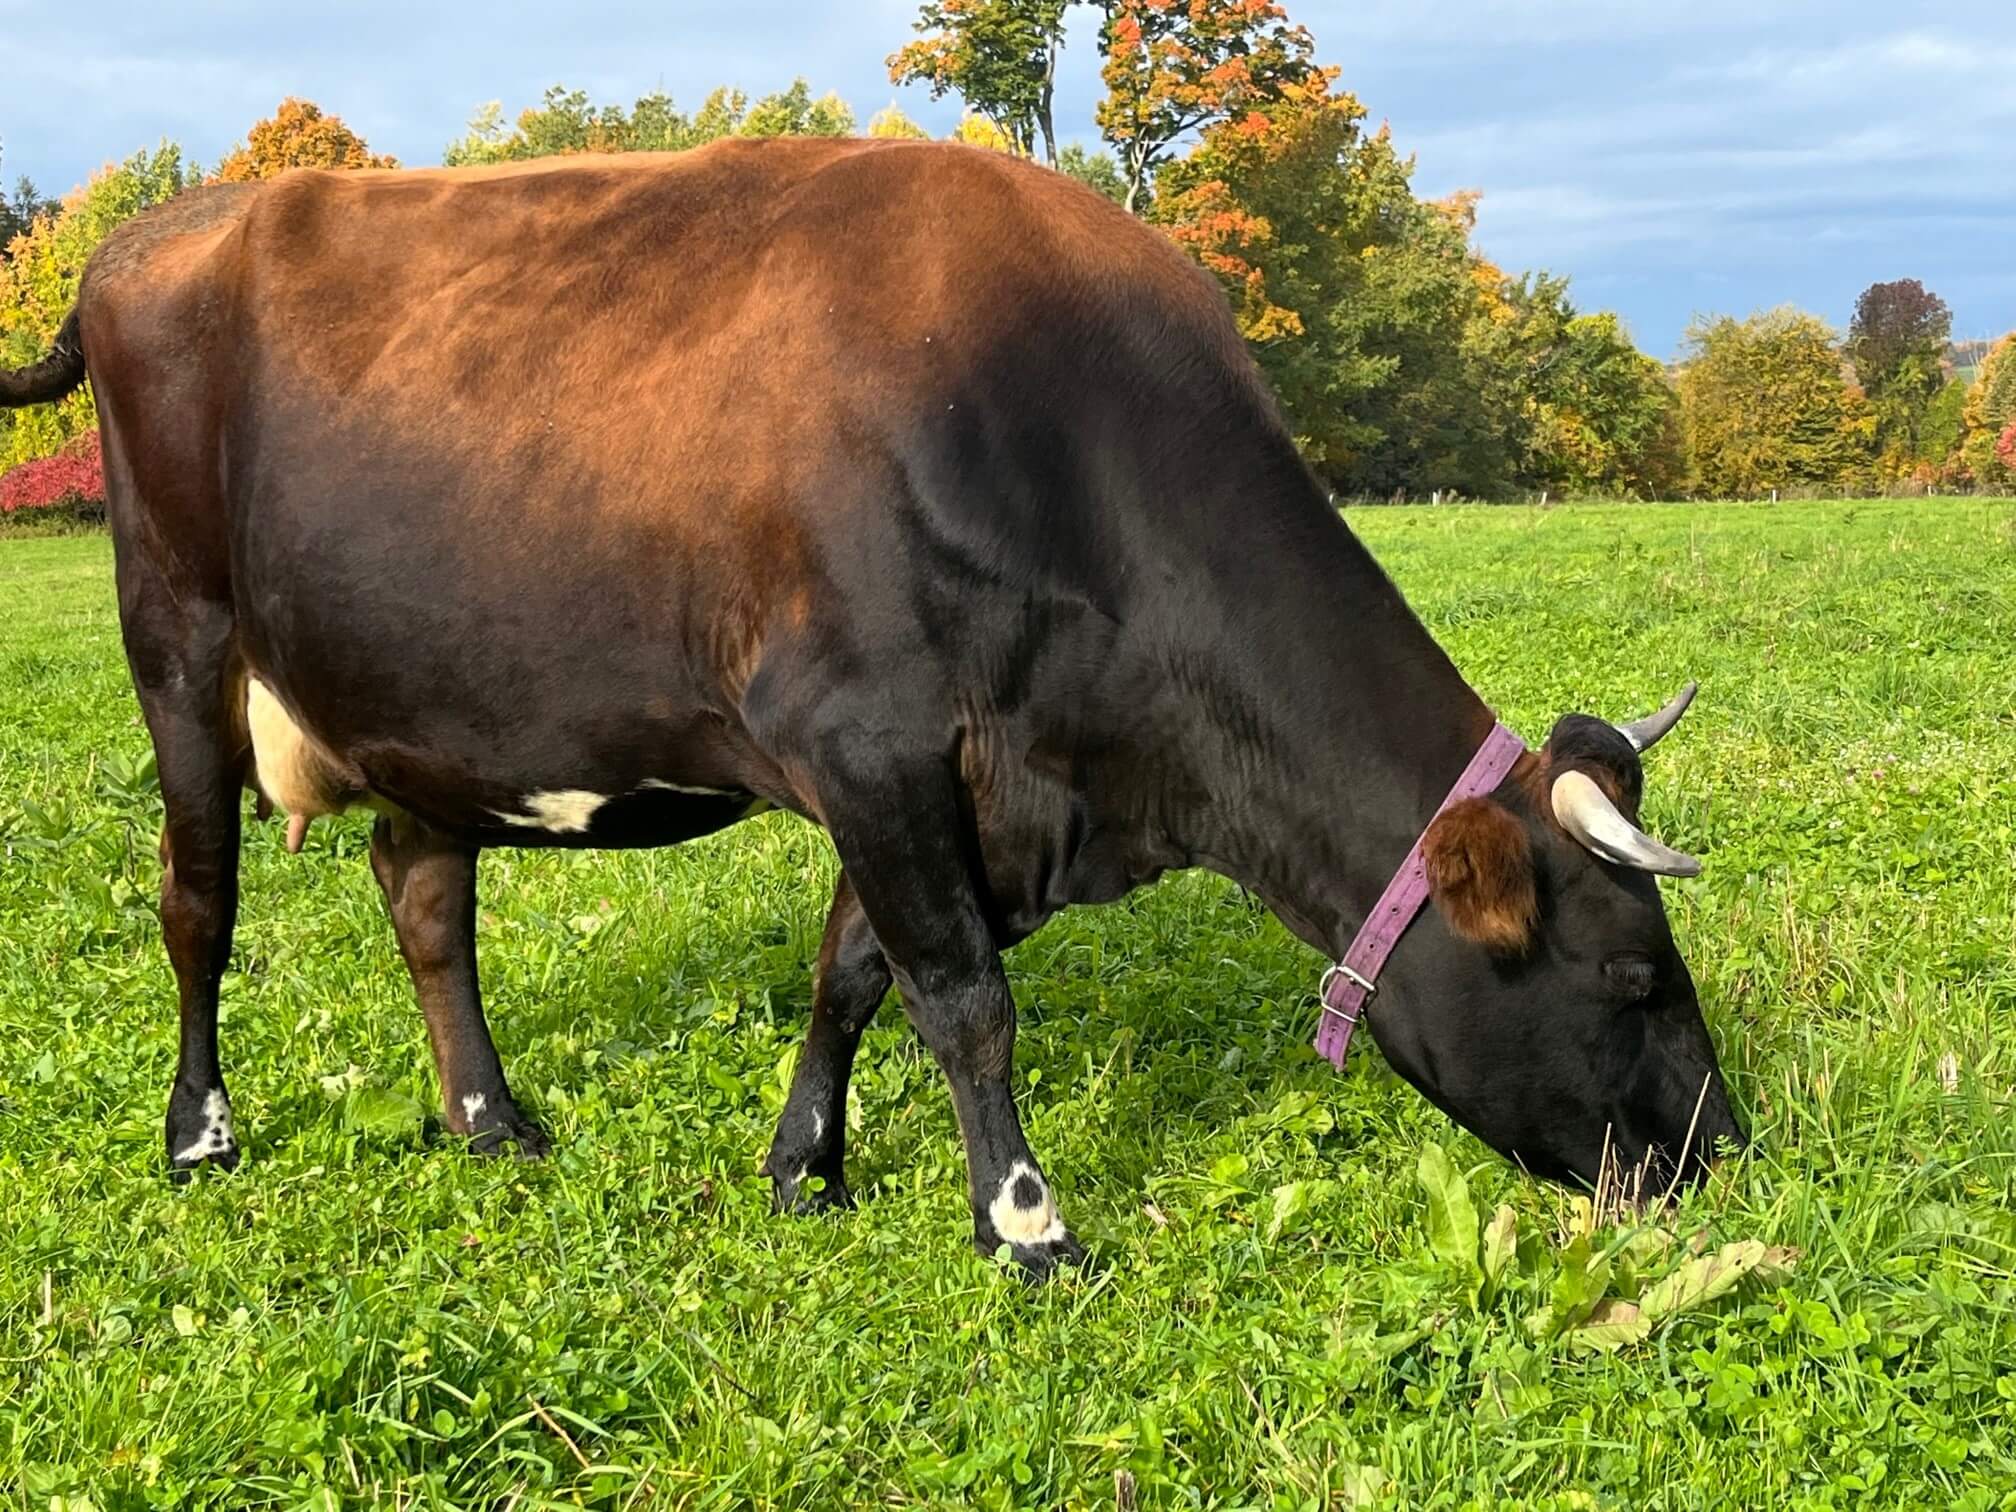 Dairy Cow grazing